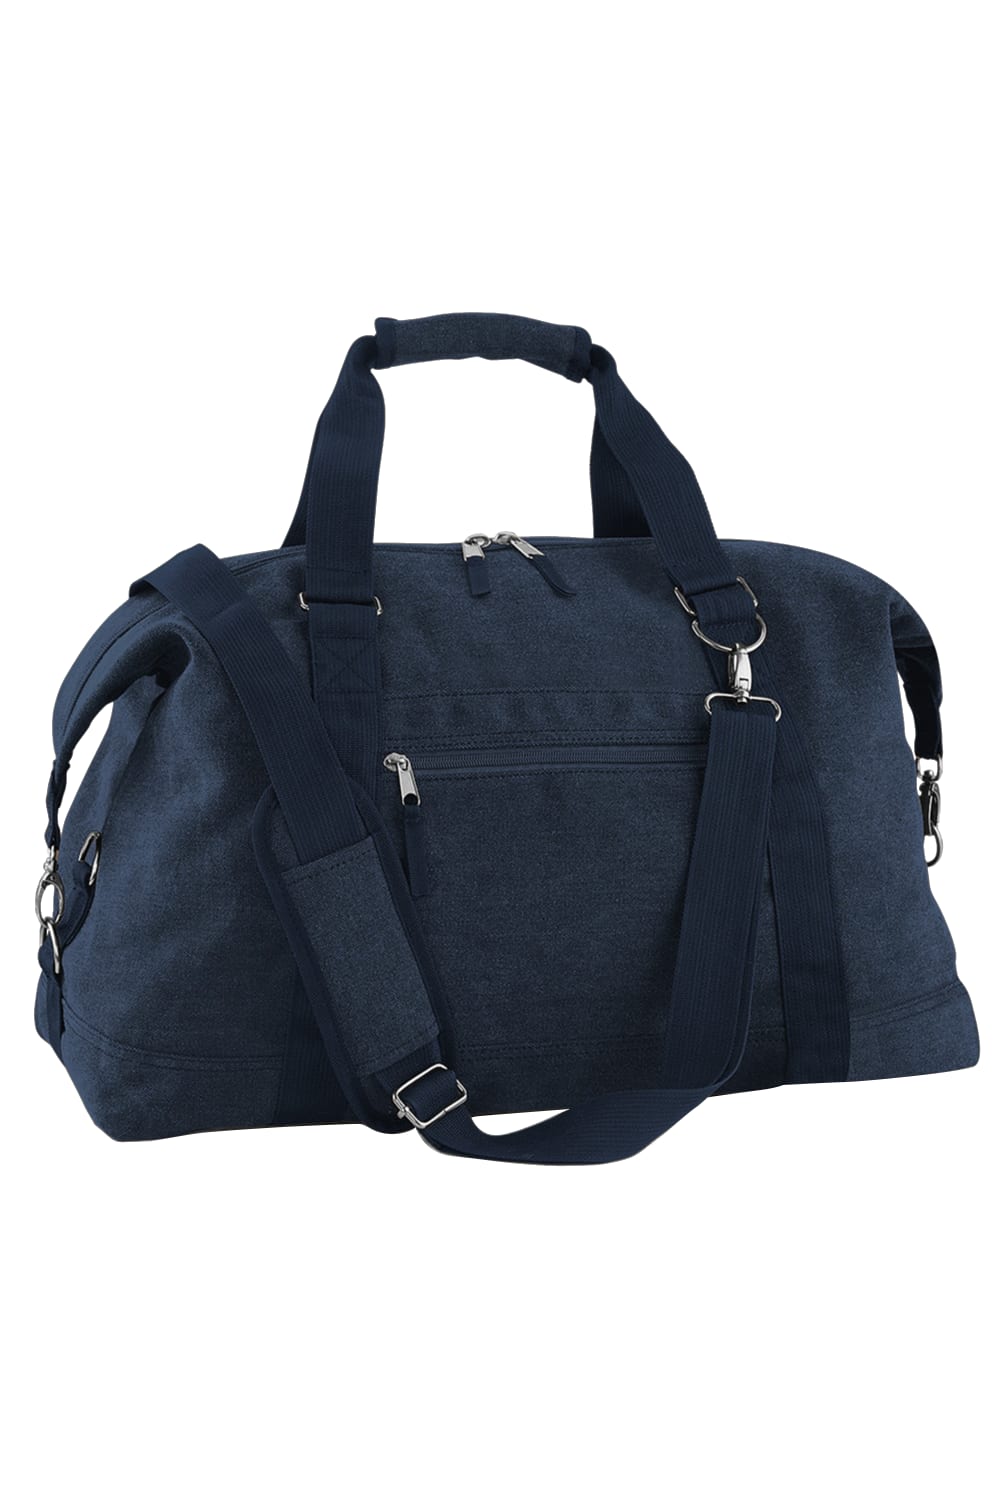 Bagbase Vintage Canvas Weekender / Carryall Carry Bag (7.9 Gallons) (Pack of 2) (Vintage Oxford Navy) (One Size)